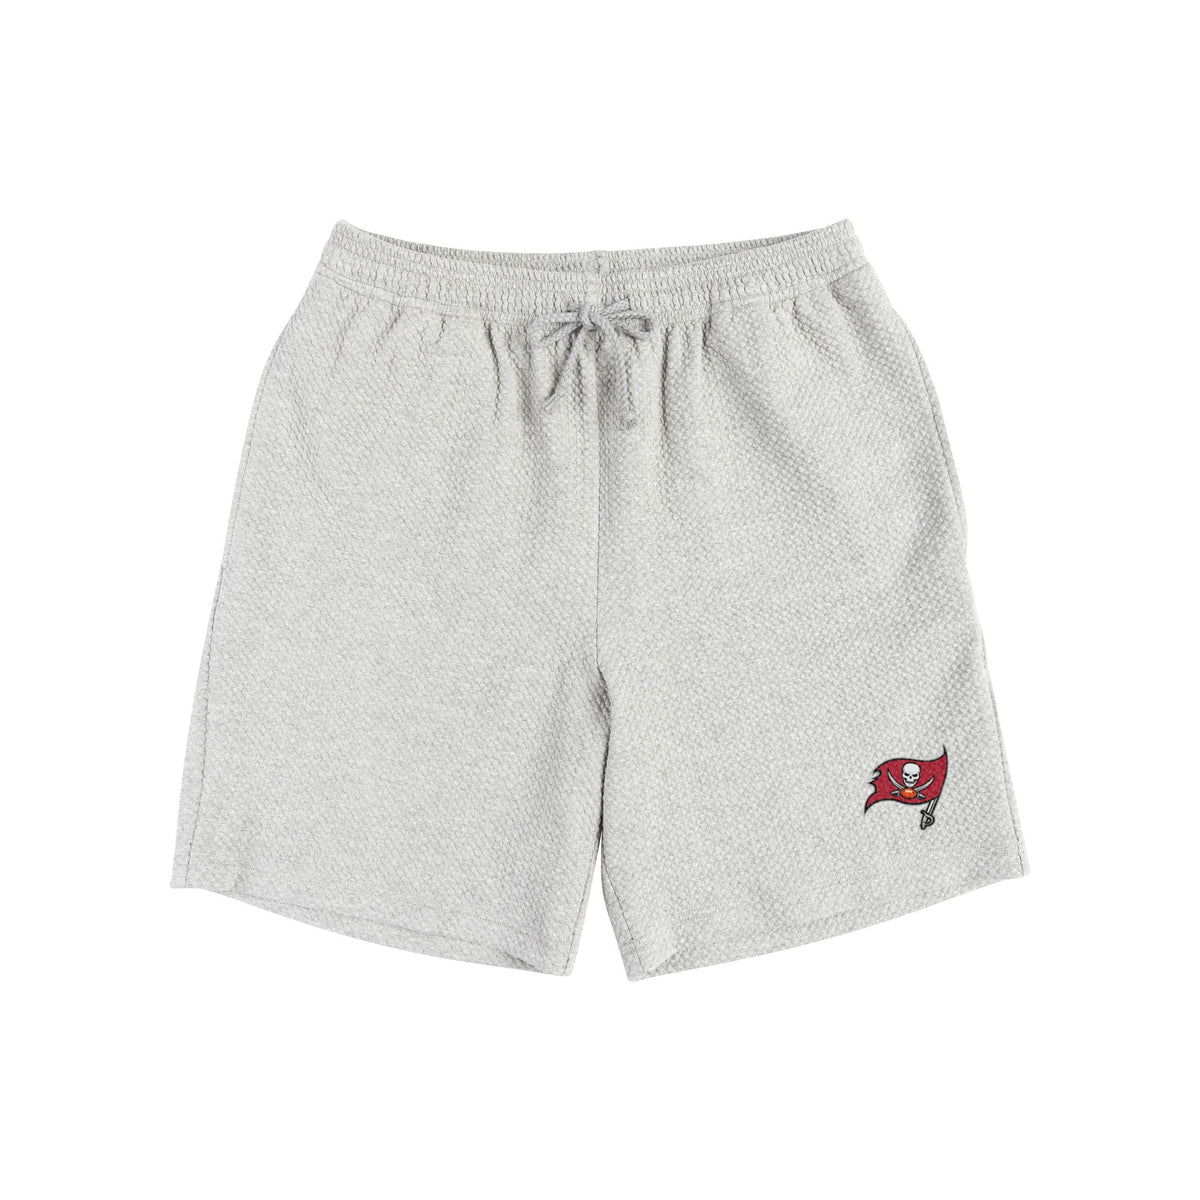 Tampa Bay Buccaneers NFL Mens Gray Woven Shorts